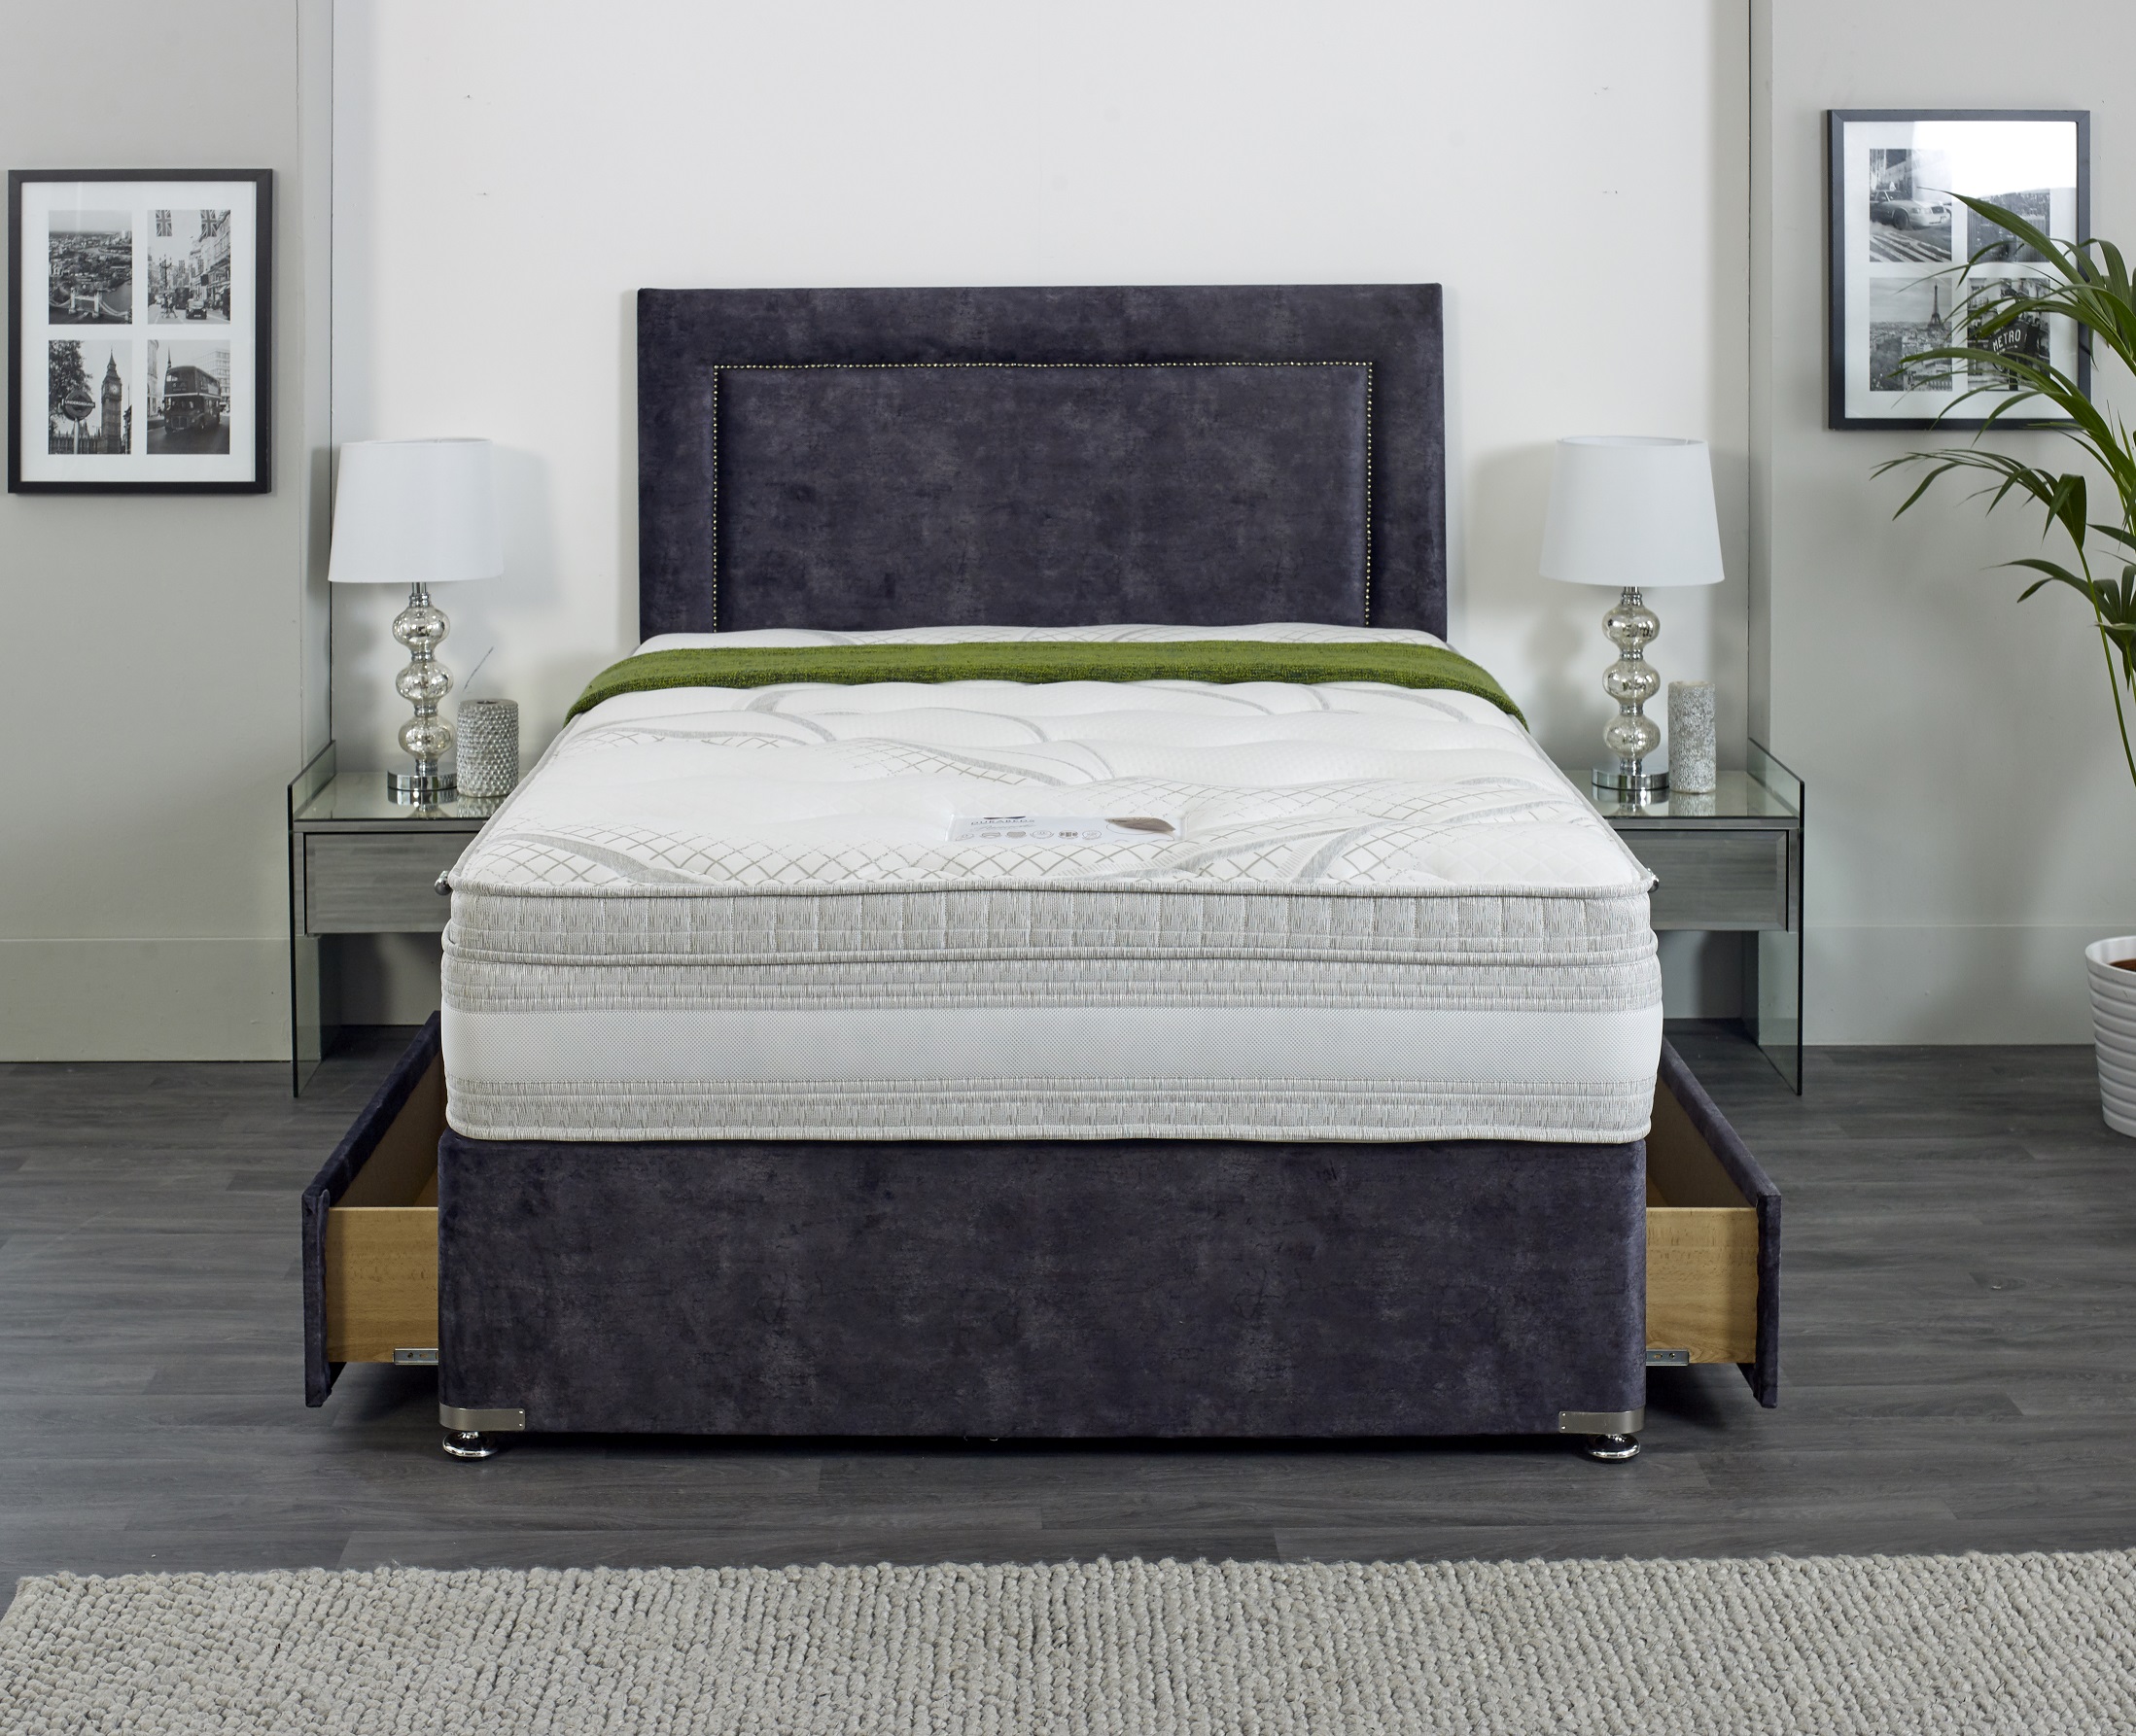 madrid divan bed first pic